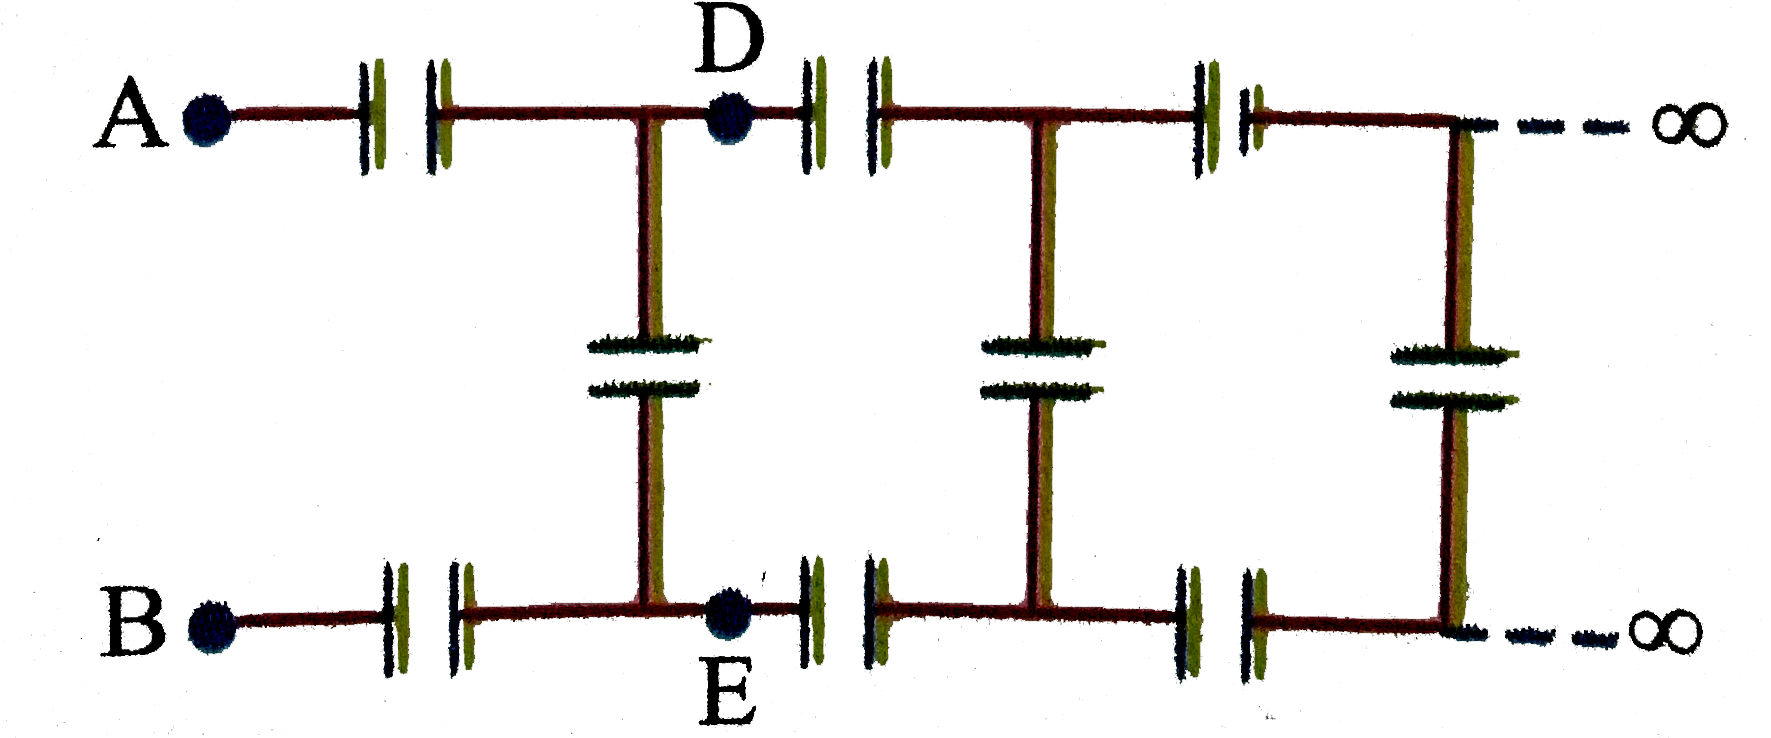 The equivalent capacity of the infinite net work shown in the figure (across AB) is (Capacity of each capacitor is 1 mu F)   .